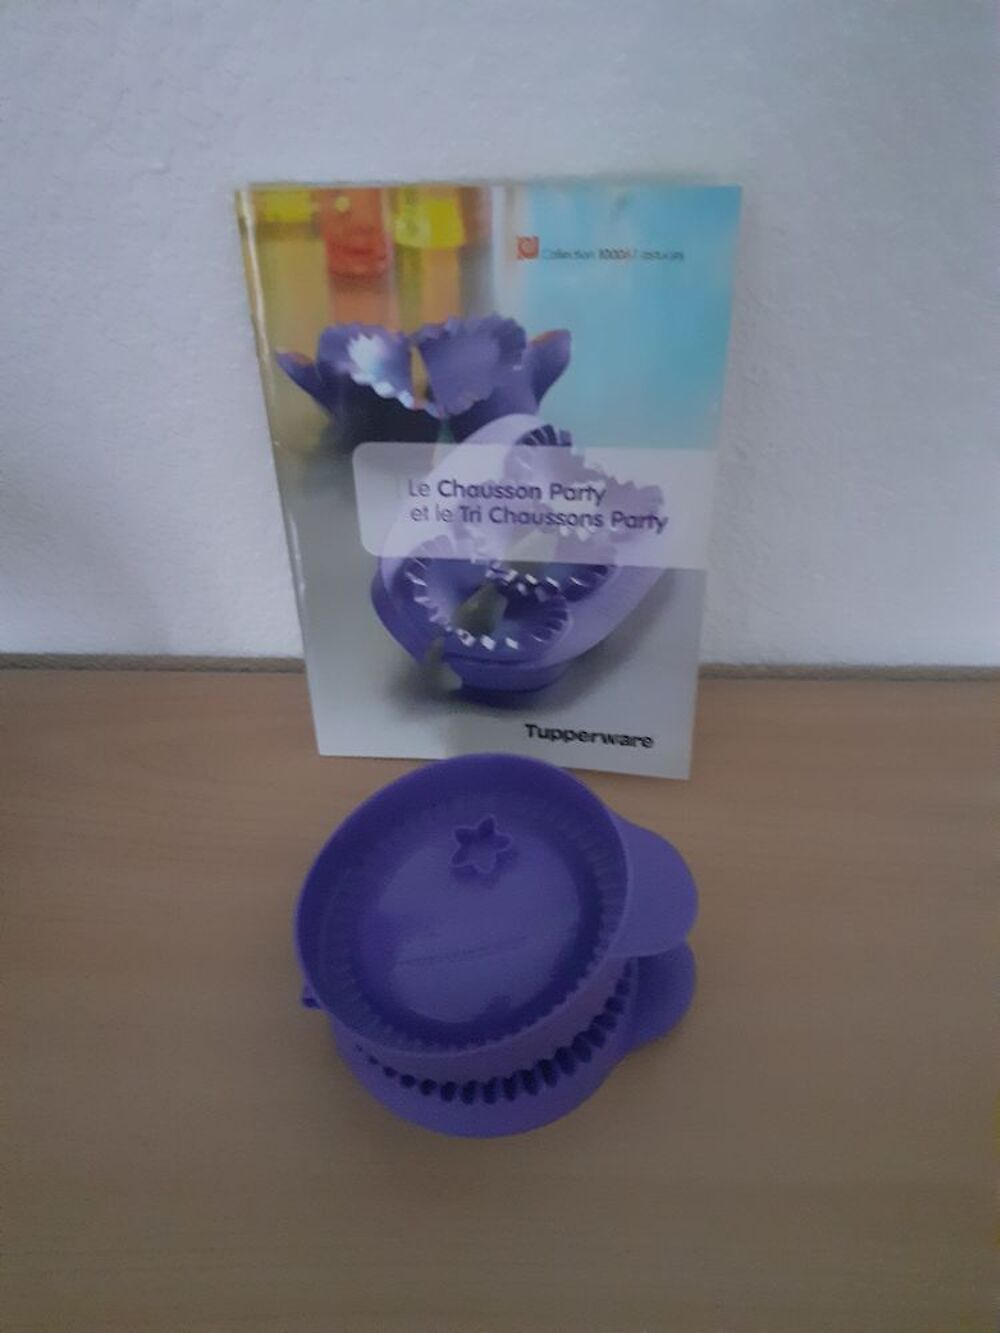 Chausson party Tupperware Cuisine